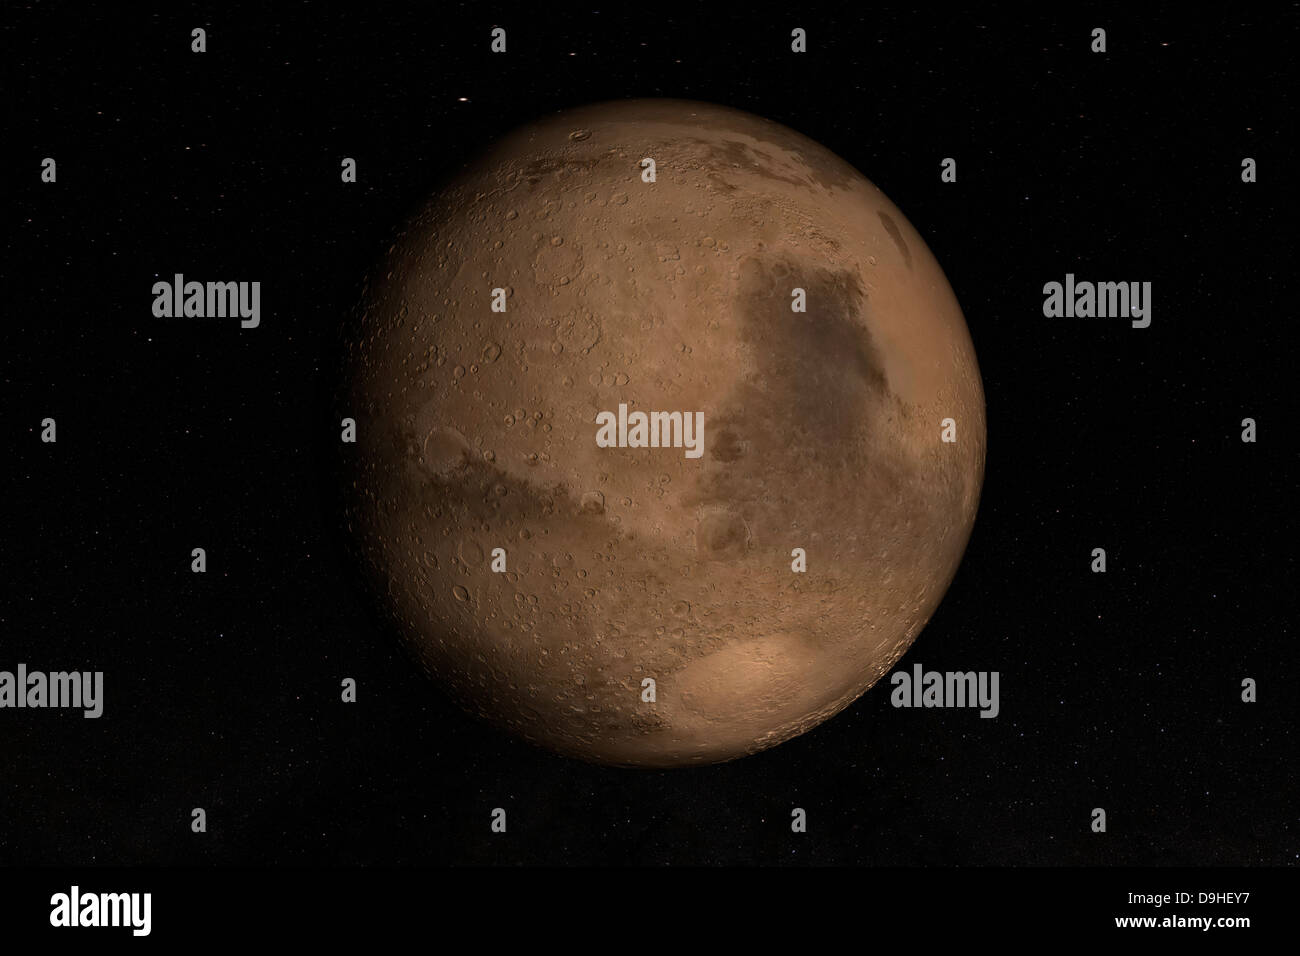 Planet Mars. Hellas Basin can be seen in the lower right portion of the image. Stock Photo